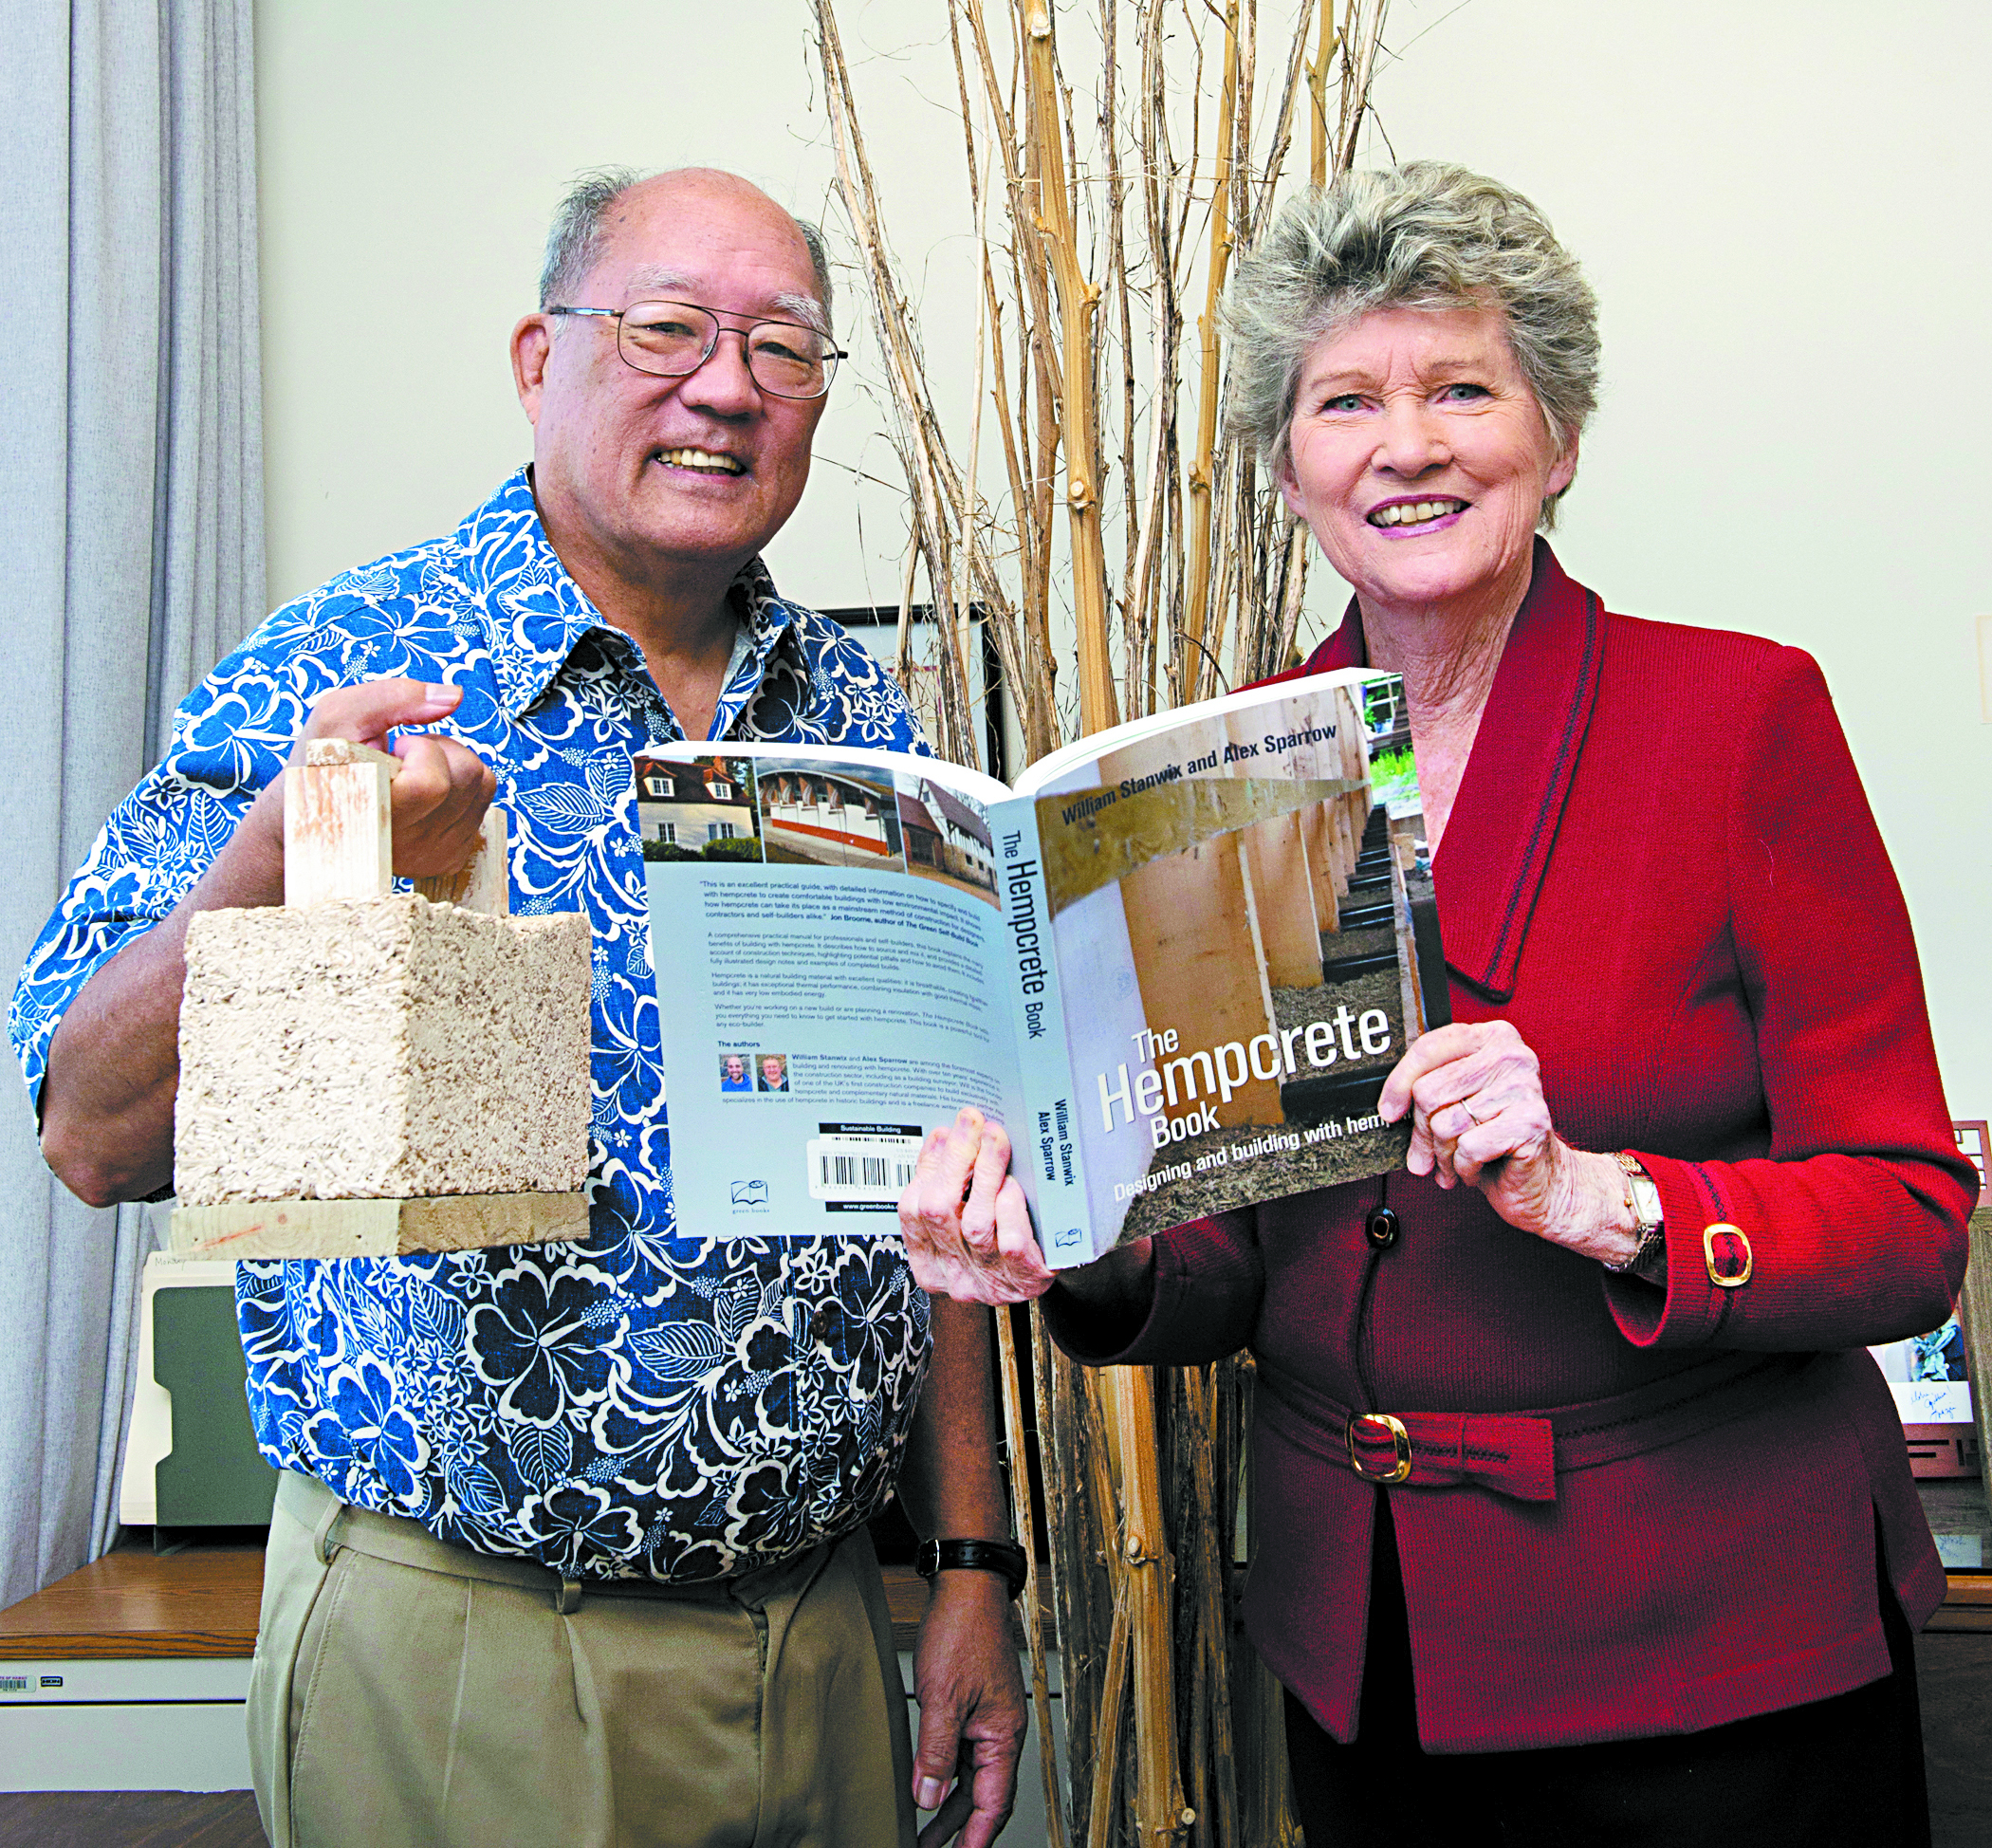 Industrial hemp research project principal investigator Harry Ako, Ph.D., and longtime industrial hemp proponent state Rep. Cynthia Thielen with a hempcrete sample and a book. Behind them are hemp stalks  